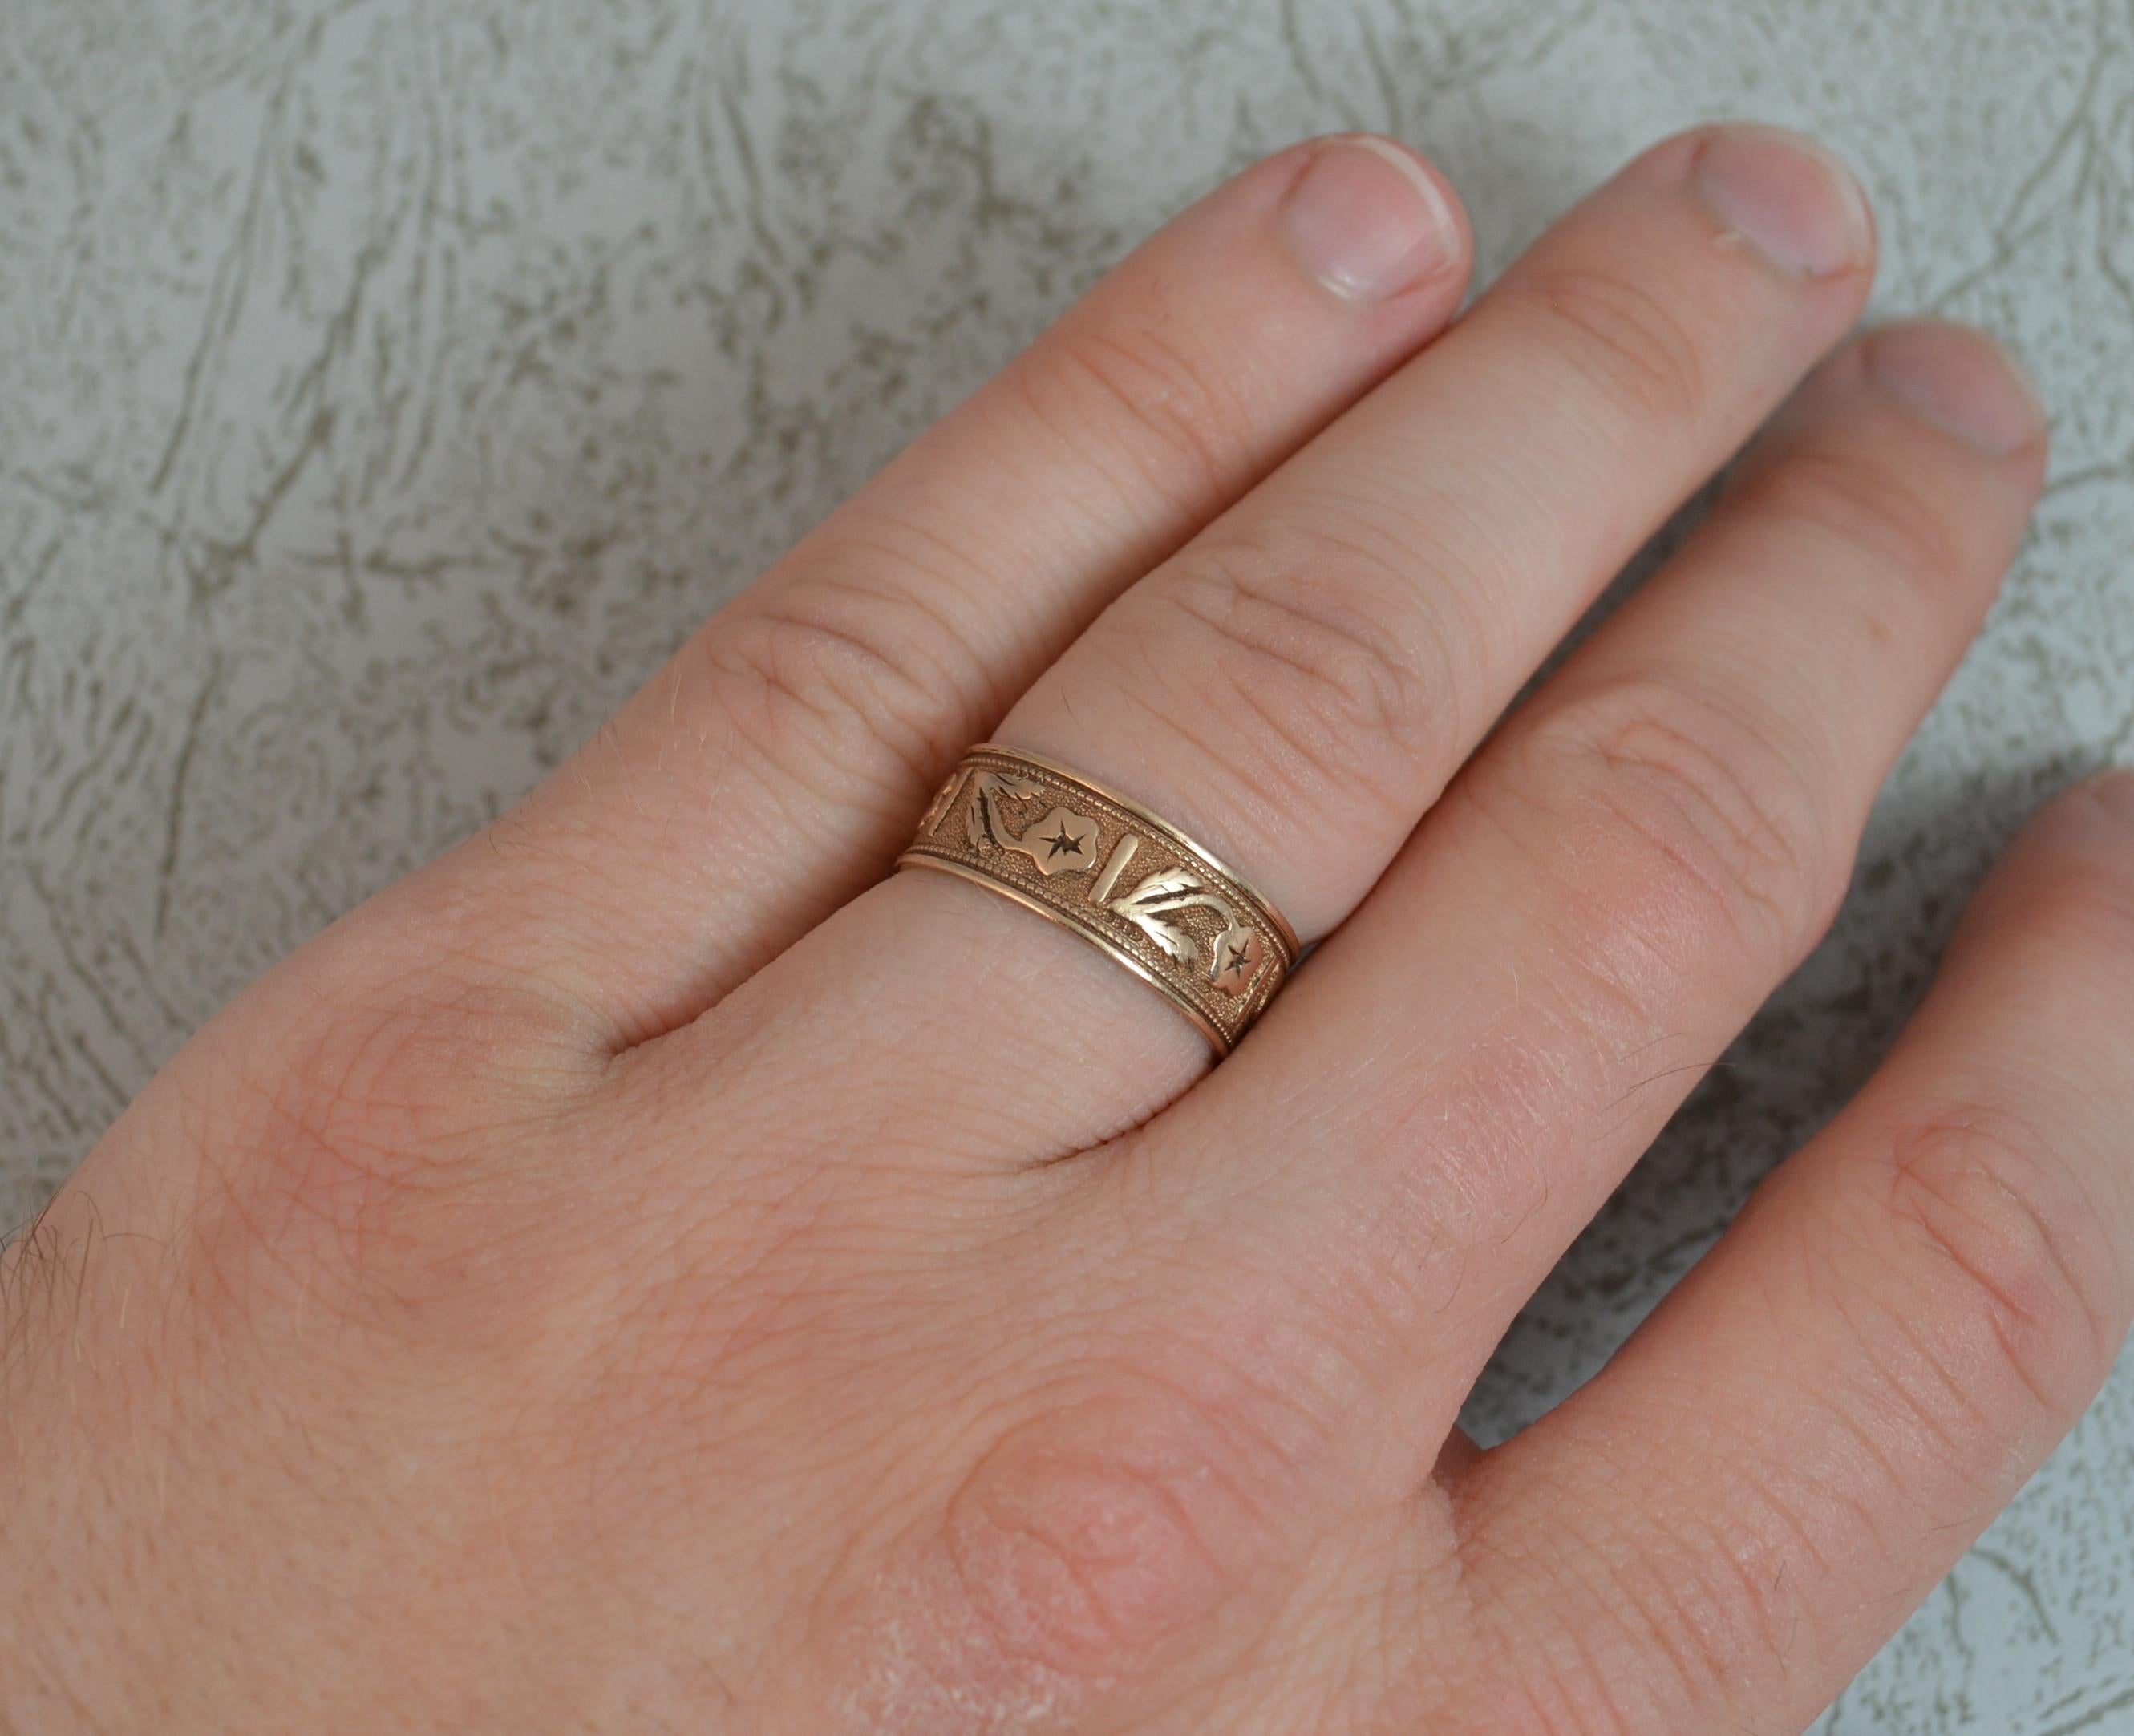 A fine quality antique gold band.
Solid 14 carat rose gold.
7mm wide band throughout.
Designed with a floral engraved finish and blank cartouche.

CONDITION ; Very good for age. Clean band. Crisp pattern. Issue free. Please view photographs.

WEIGHT